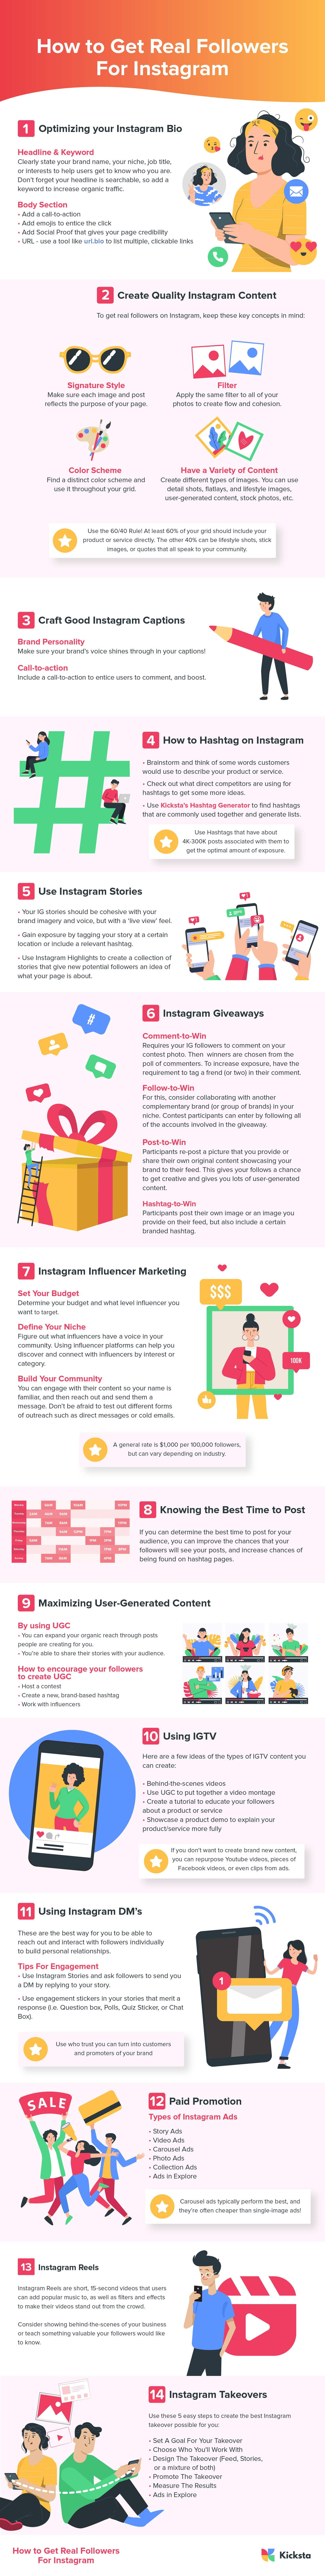 how to get real followers for Instagram infographic 